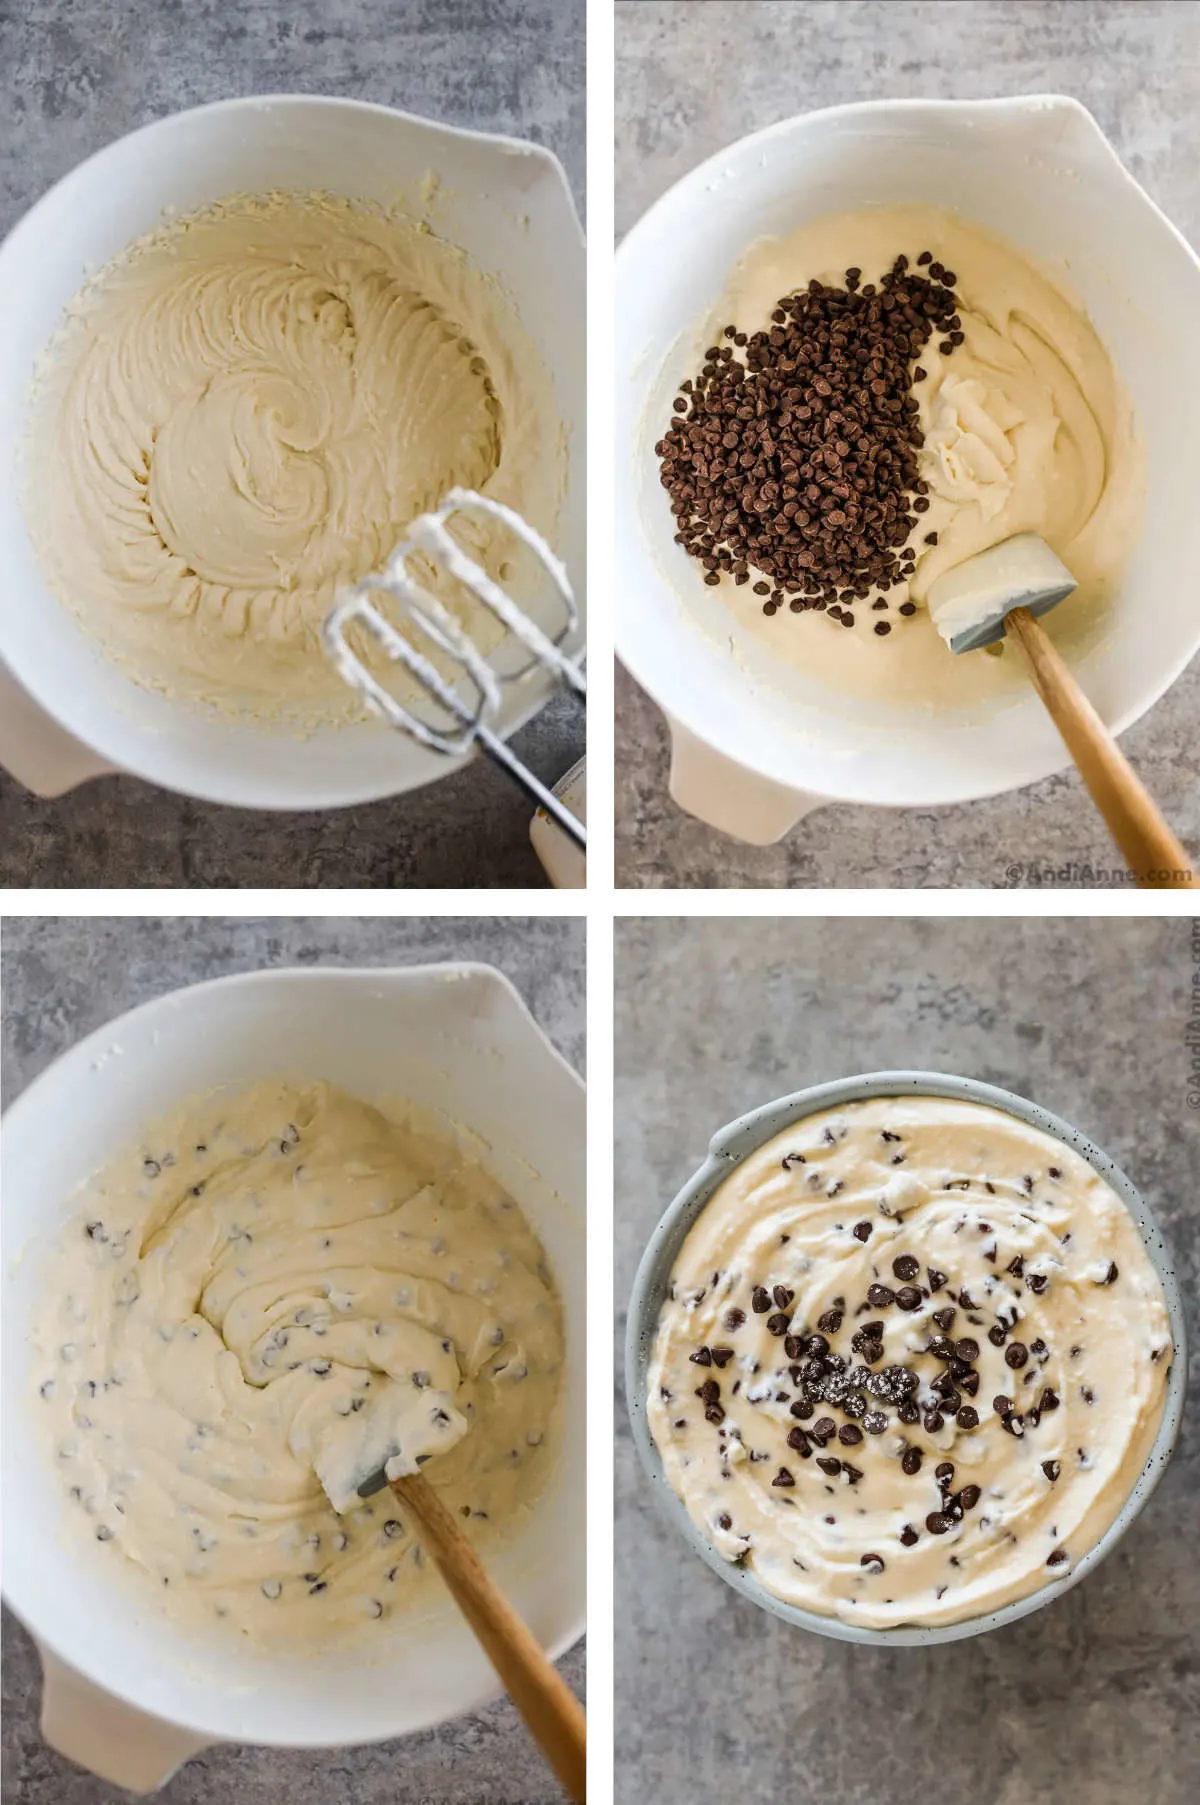 Four images in one. 1. Sugar and Vanilla extract are mixed. 2. Chocolate chips are added to the mixture. 3. Chocolate chips are mixed in. 4. The final Cannoli recipe is served in a blue bowl. 